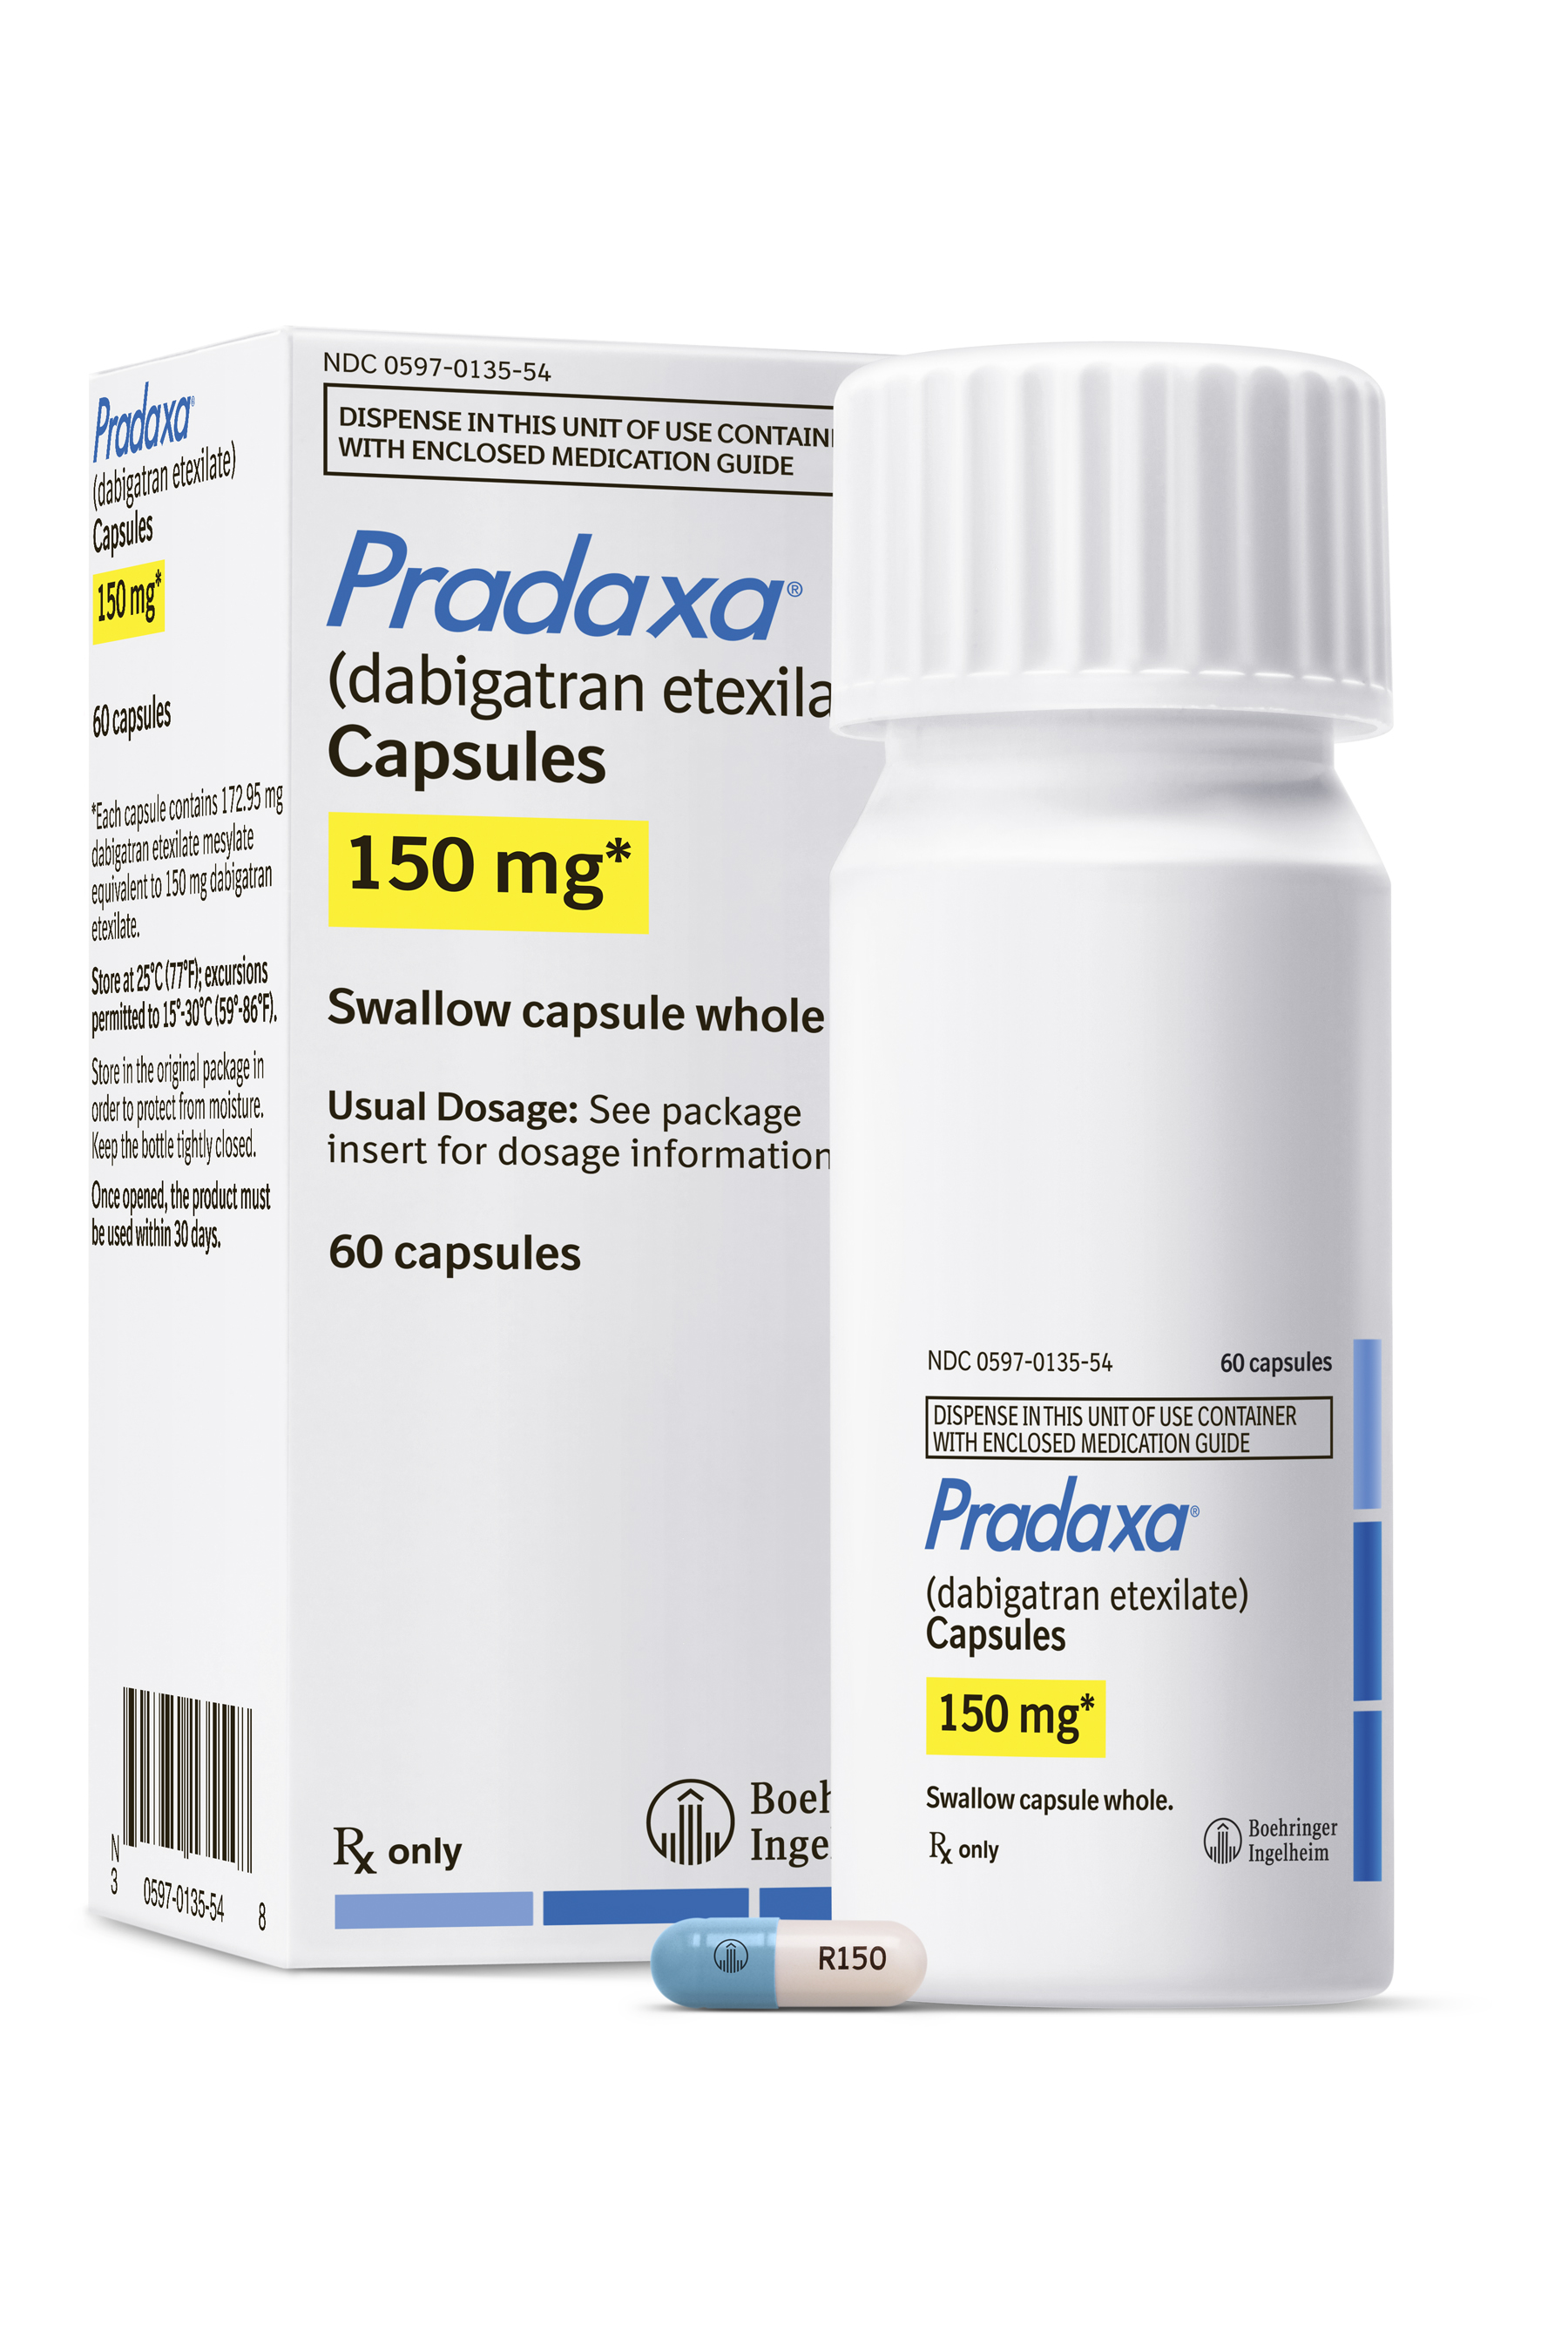 Pradaxa Patients May Need Blood Tests and Lower Doses